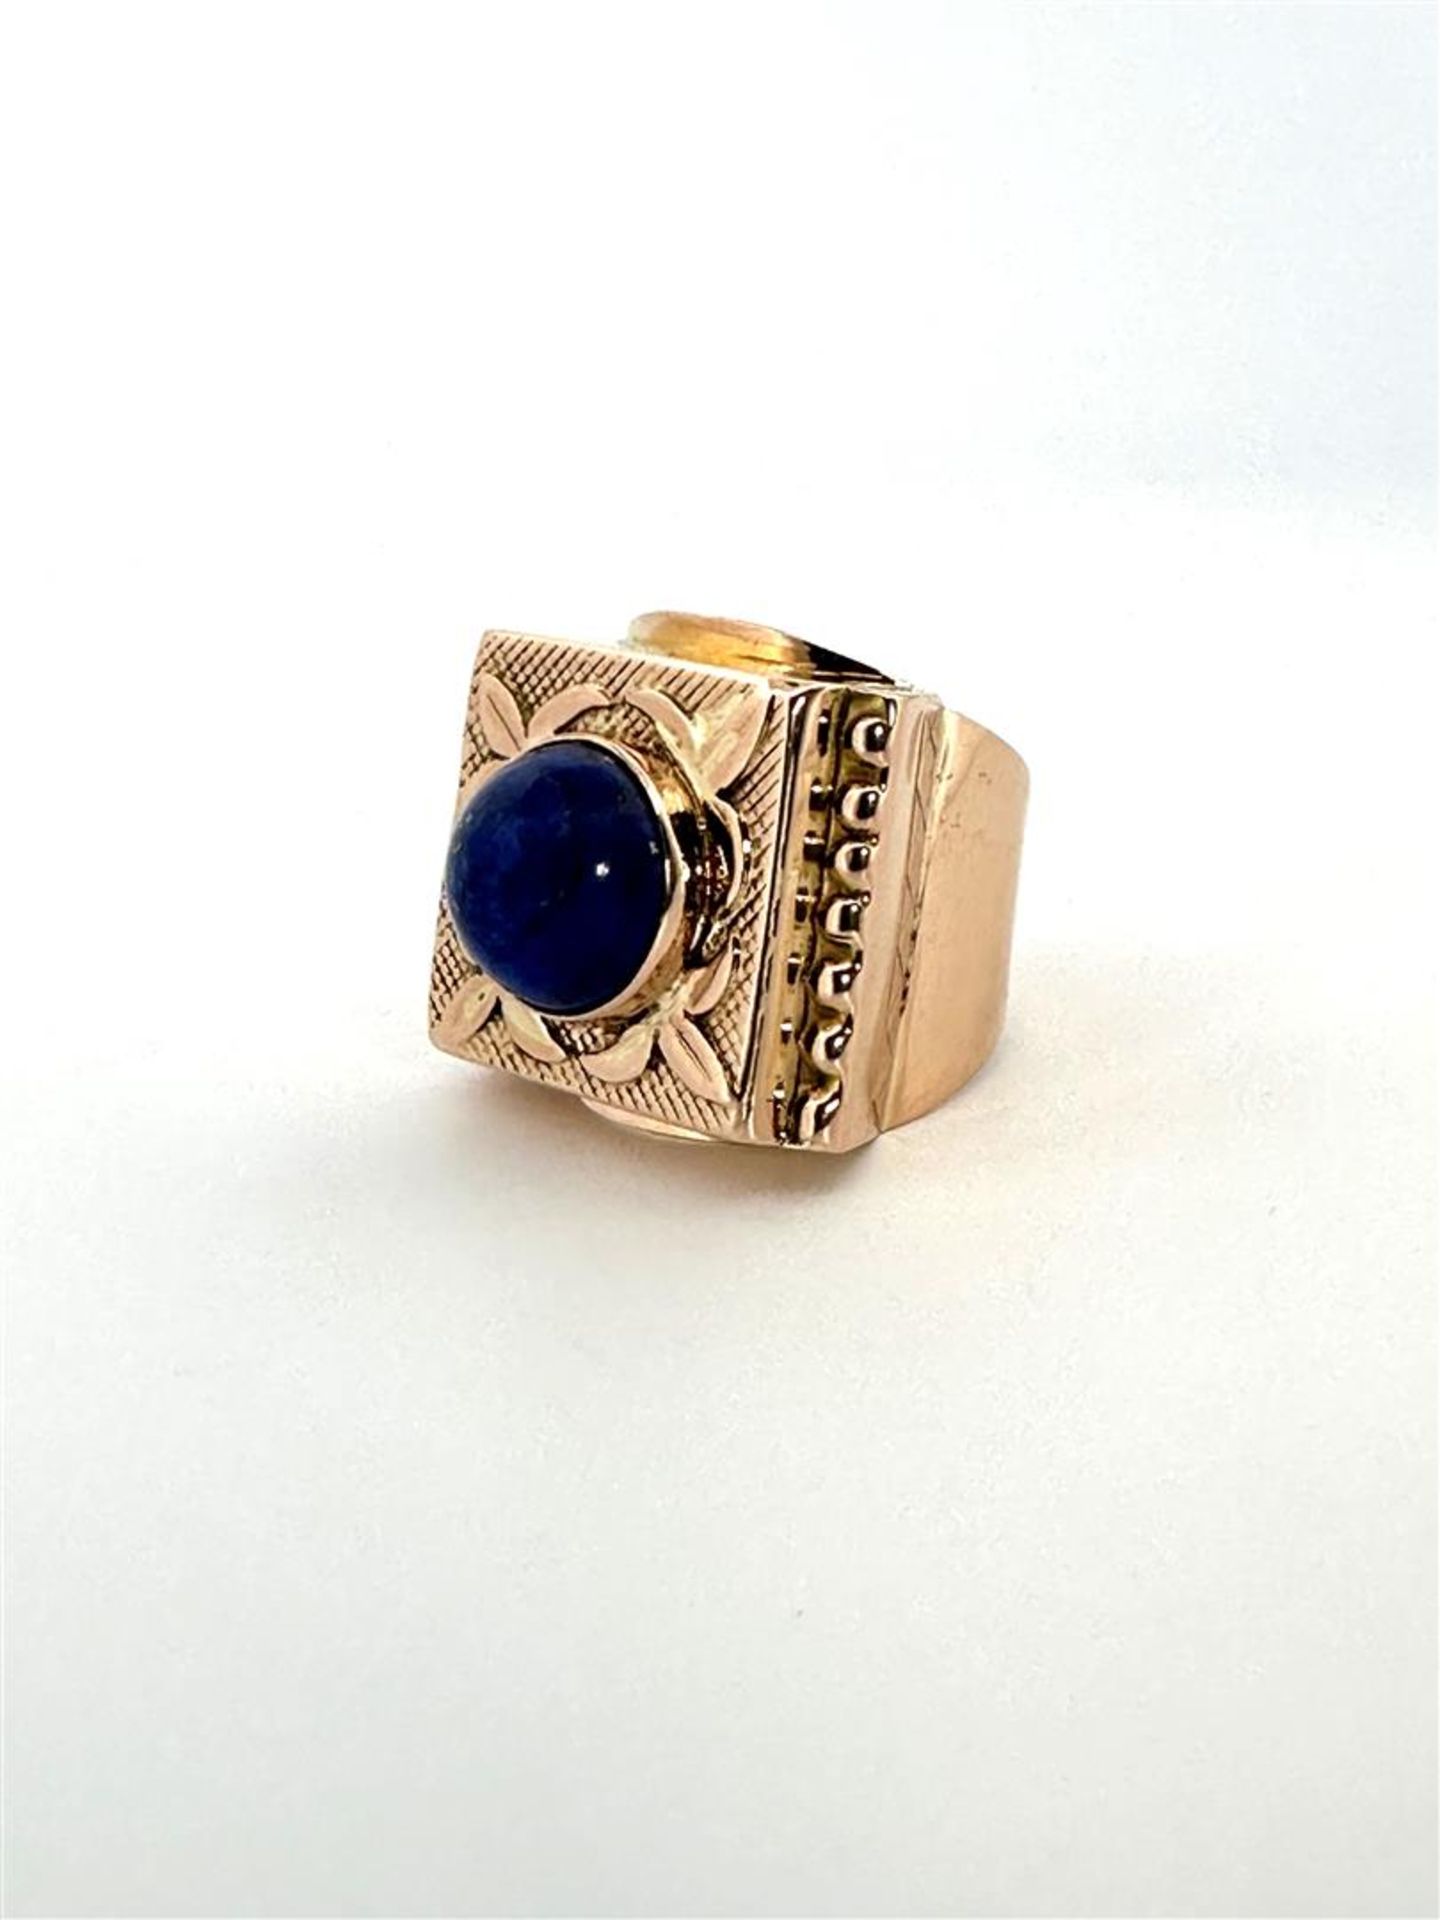 18kt yellow gold statement college ring set with Lapis Lazuli. 
The lapis lazuli is round and caboch